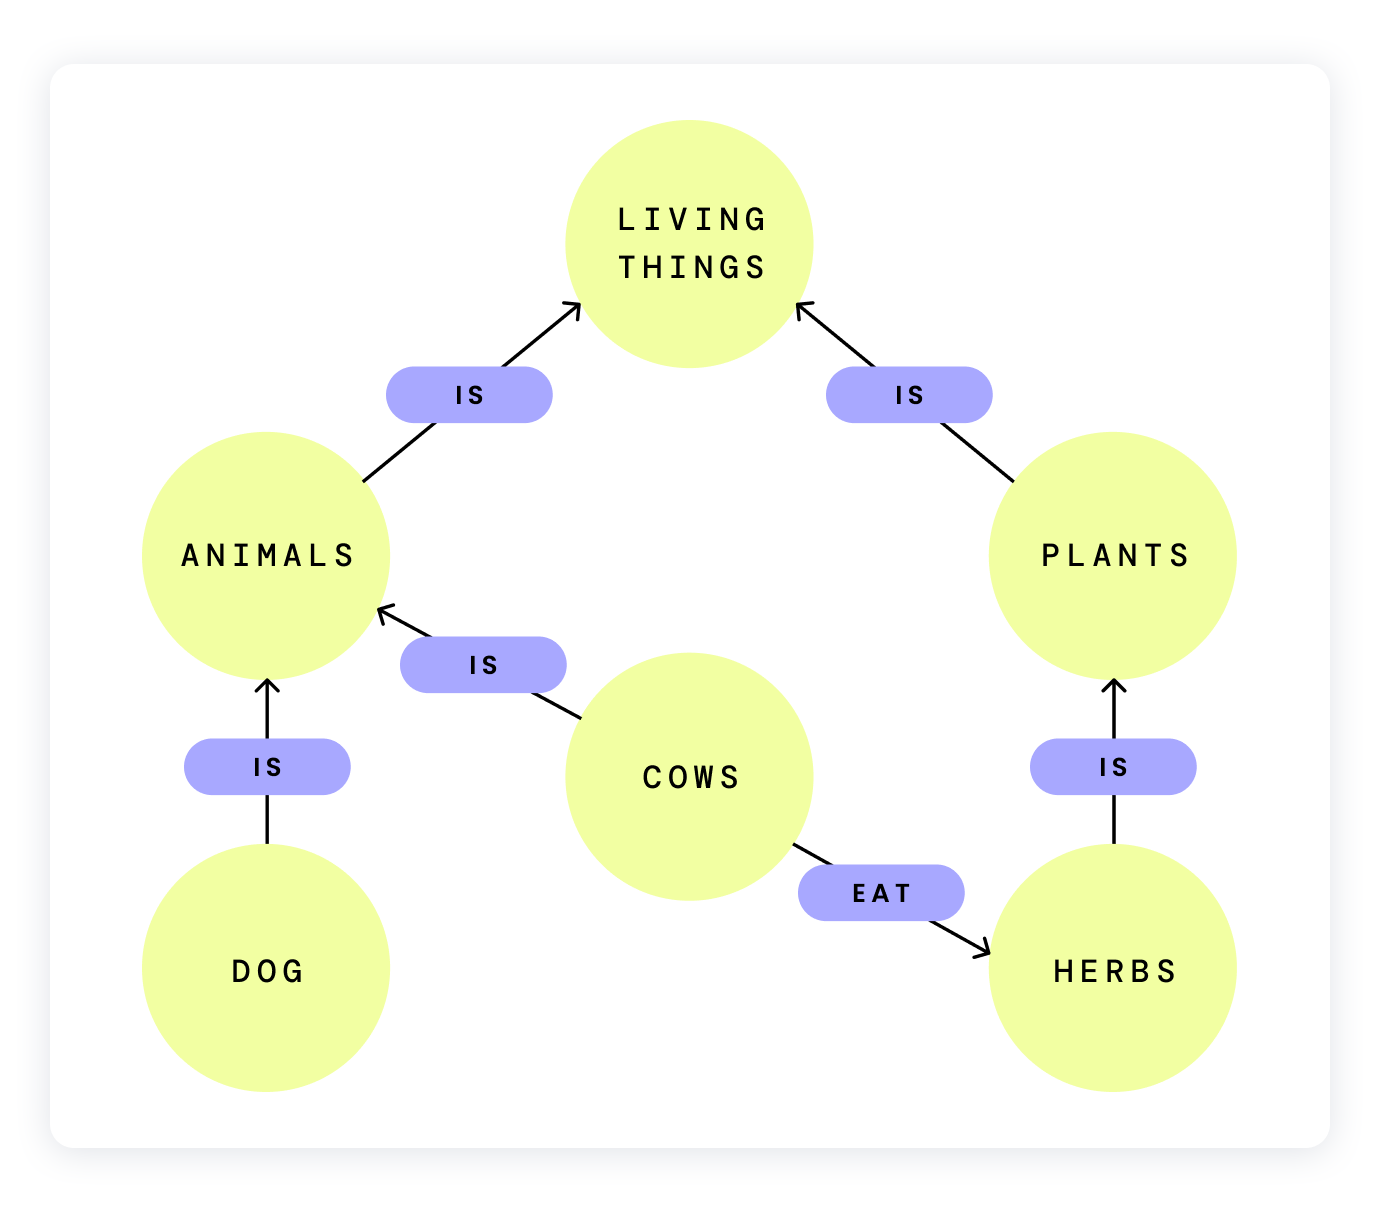 Diagram of a Knowledge Graph, showing the way information, relationships, events, and concepts are collected. Yellow circles, representing nodes in a knowledge graph, contain concepts like living things, animals, plants, cows, dogs, and herbs. Edges, represented as purple capsule shapes, contain connecting concepts such as "is" and "eat."